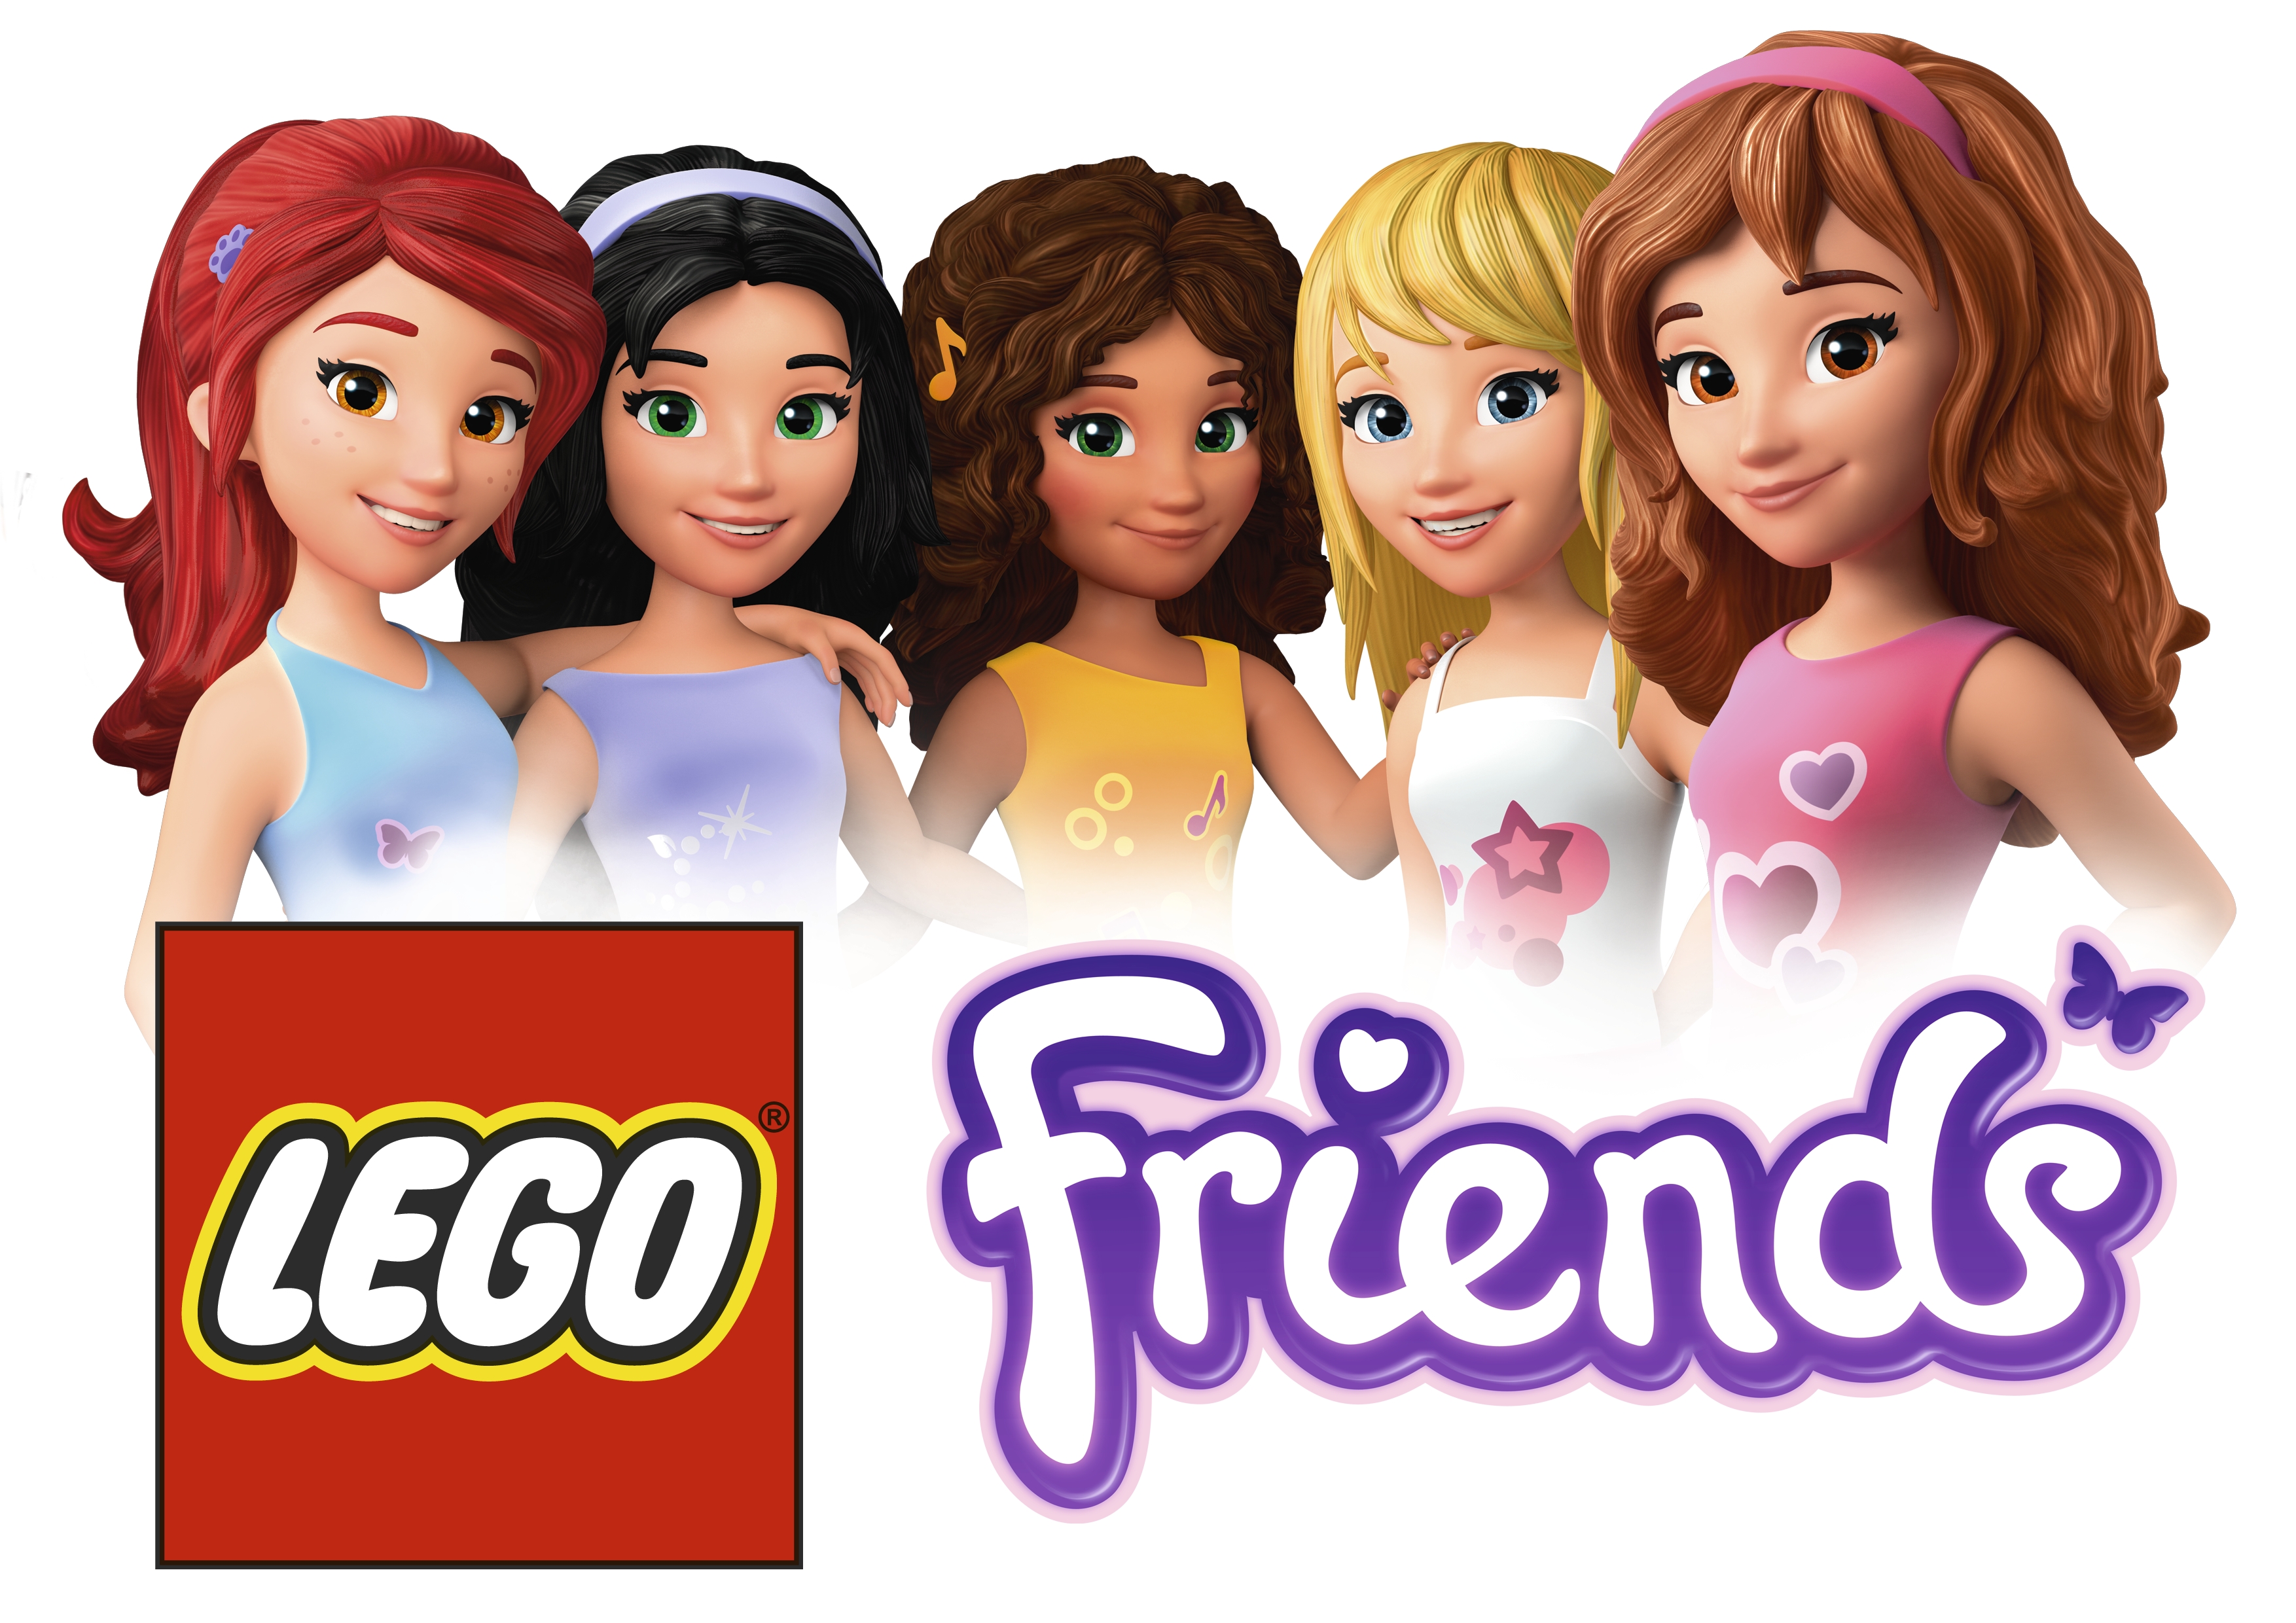 The LEGO Friends 2012 Roadshow - Parenting Without Tears